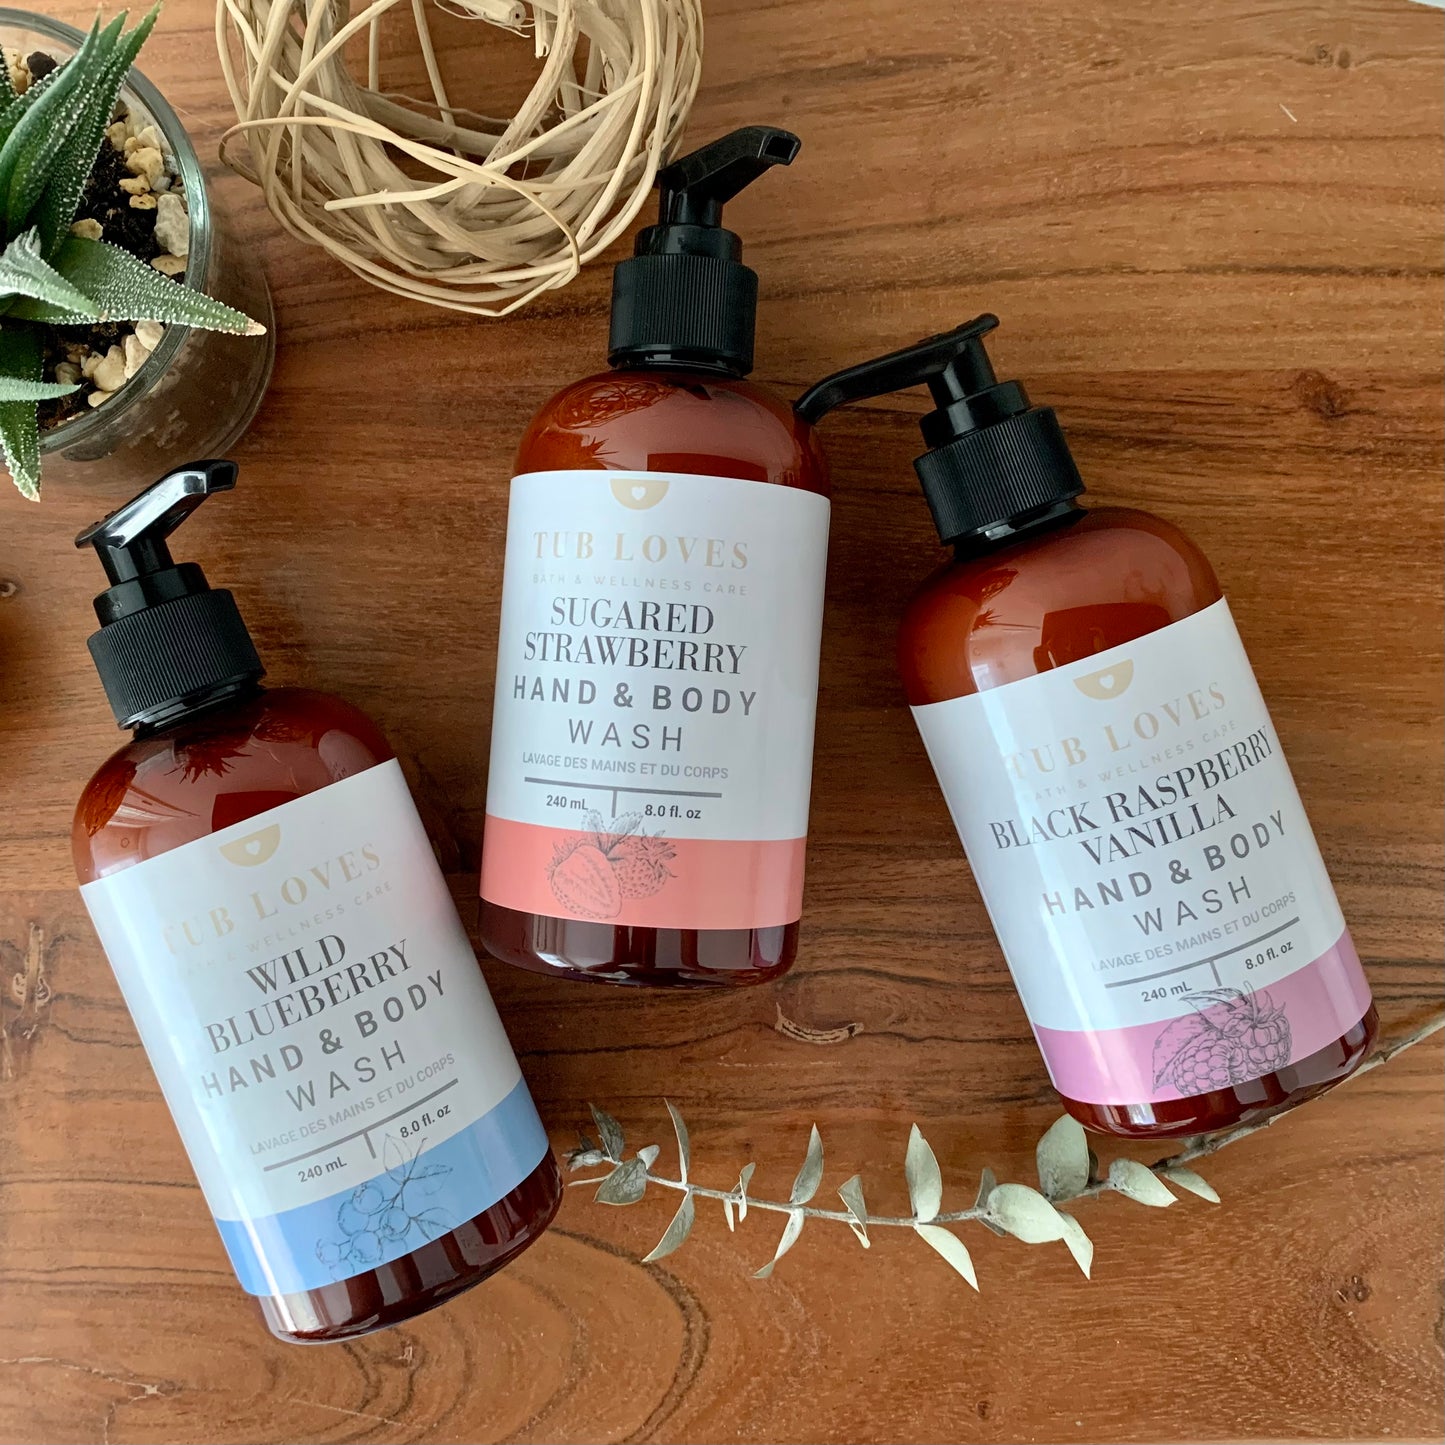 Wild Blueberry - Hand and Body Wash